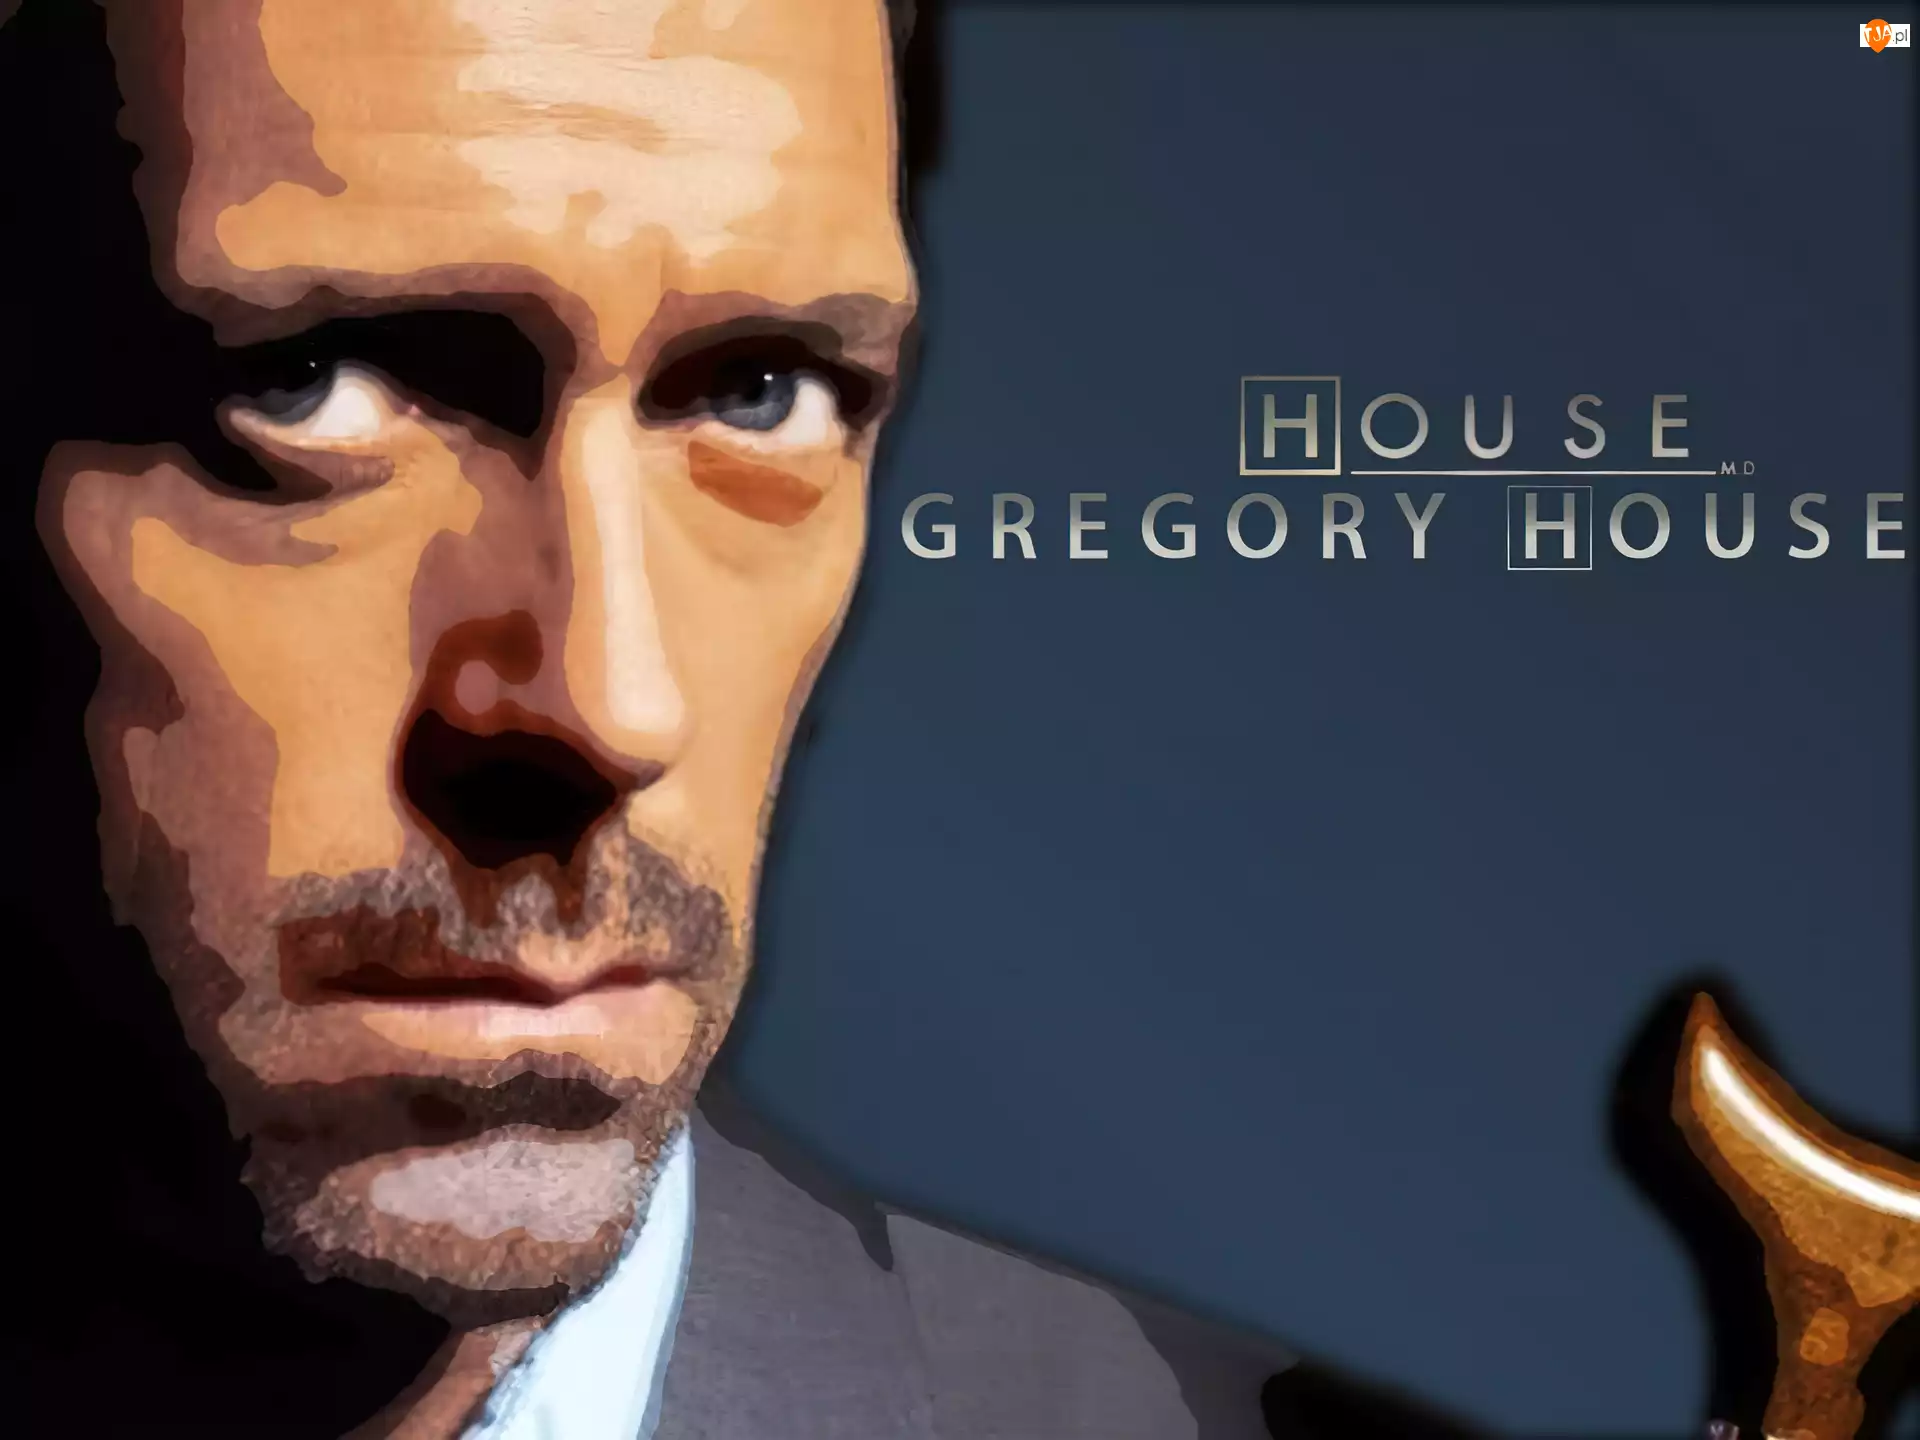 Gregory House, Dr. House